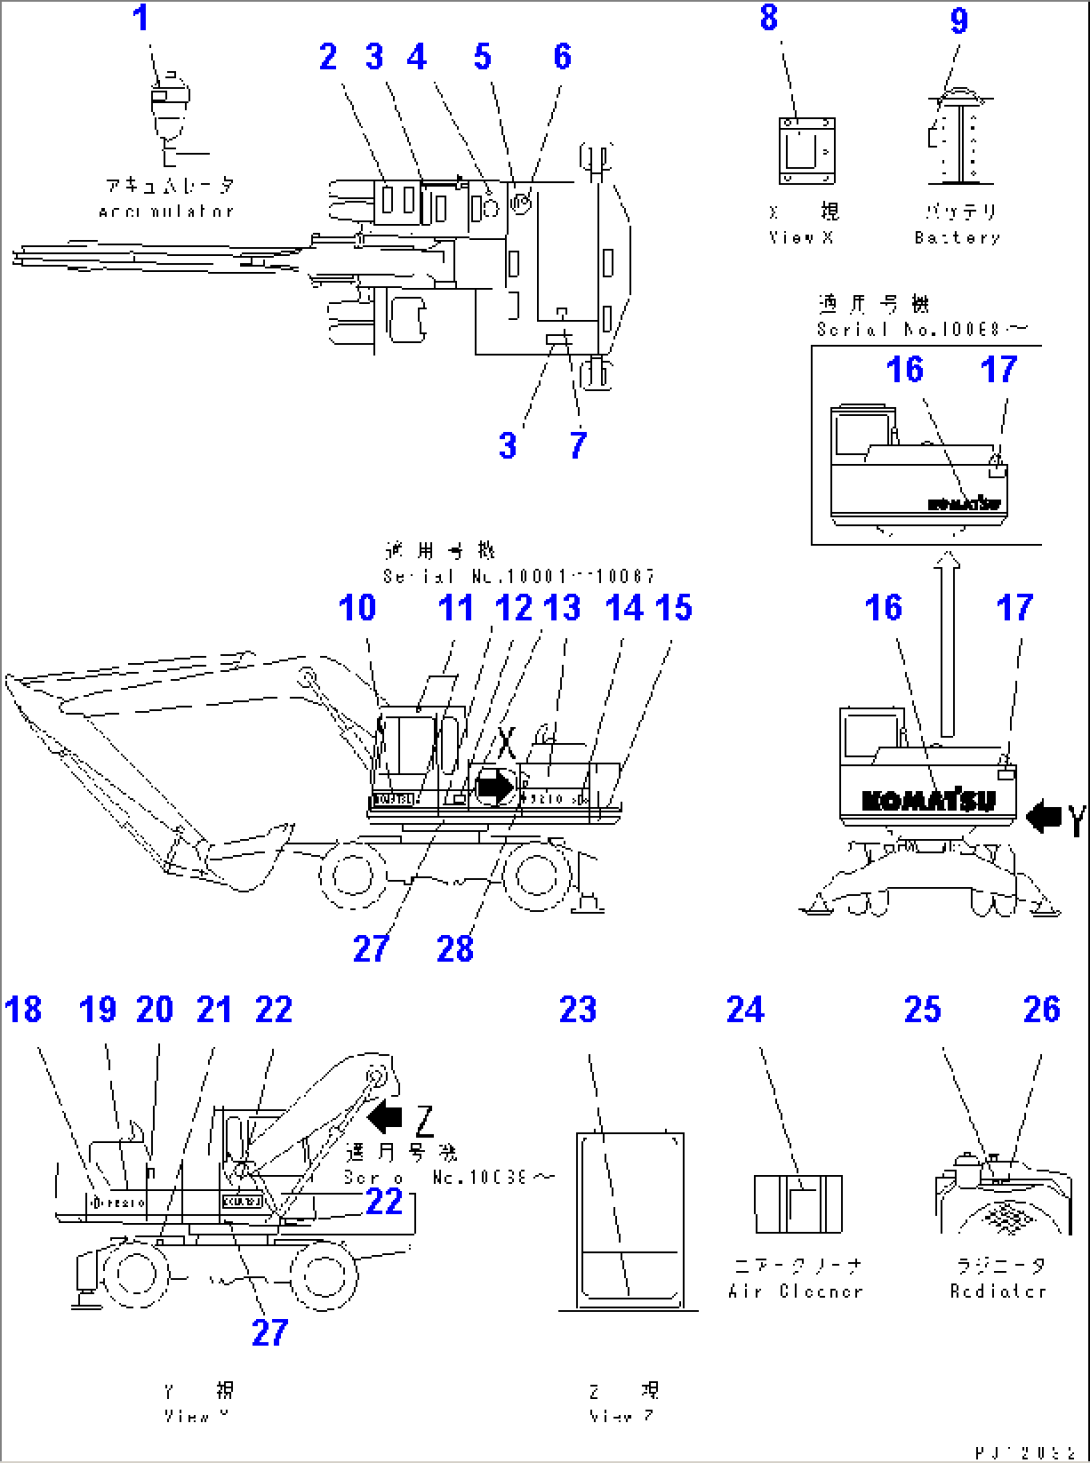 MARKS AND PLATES (CHASSIS) (SPANISH)